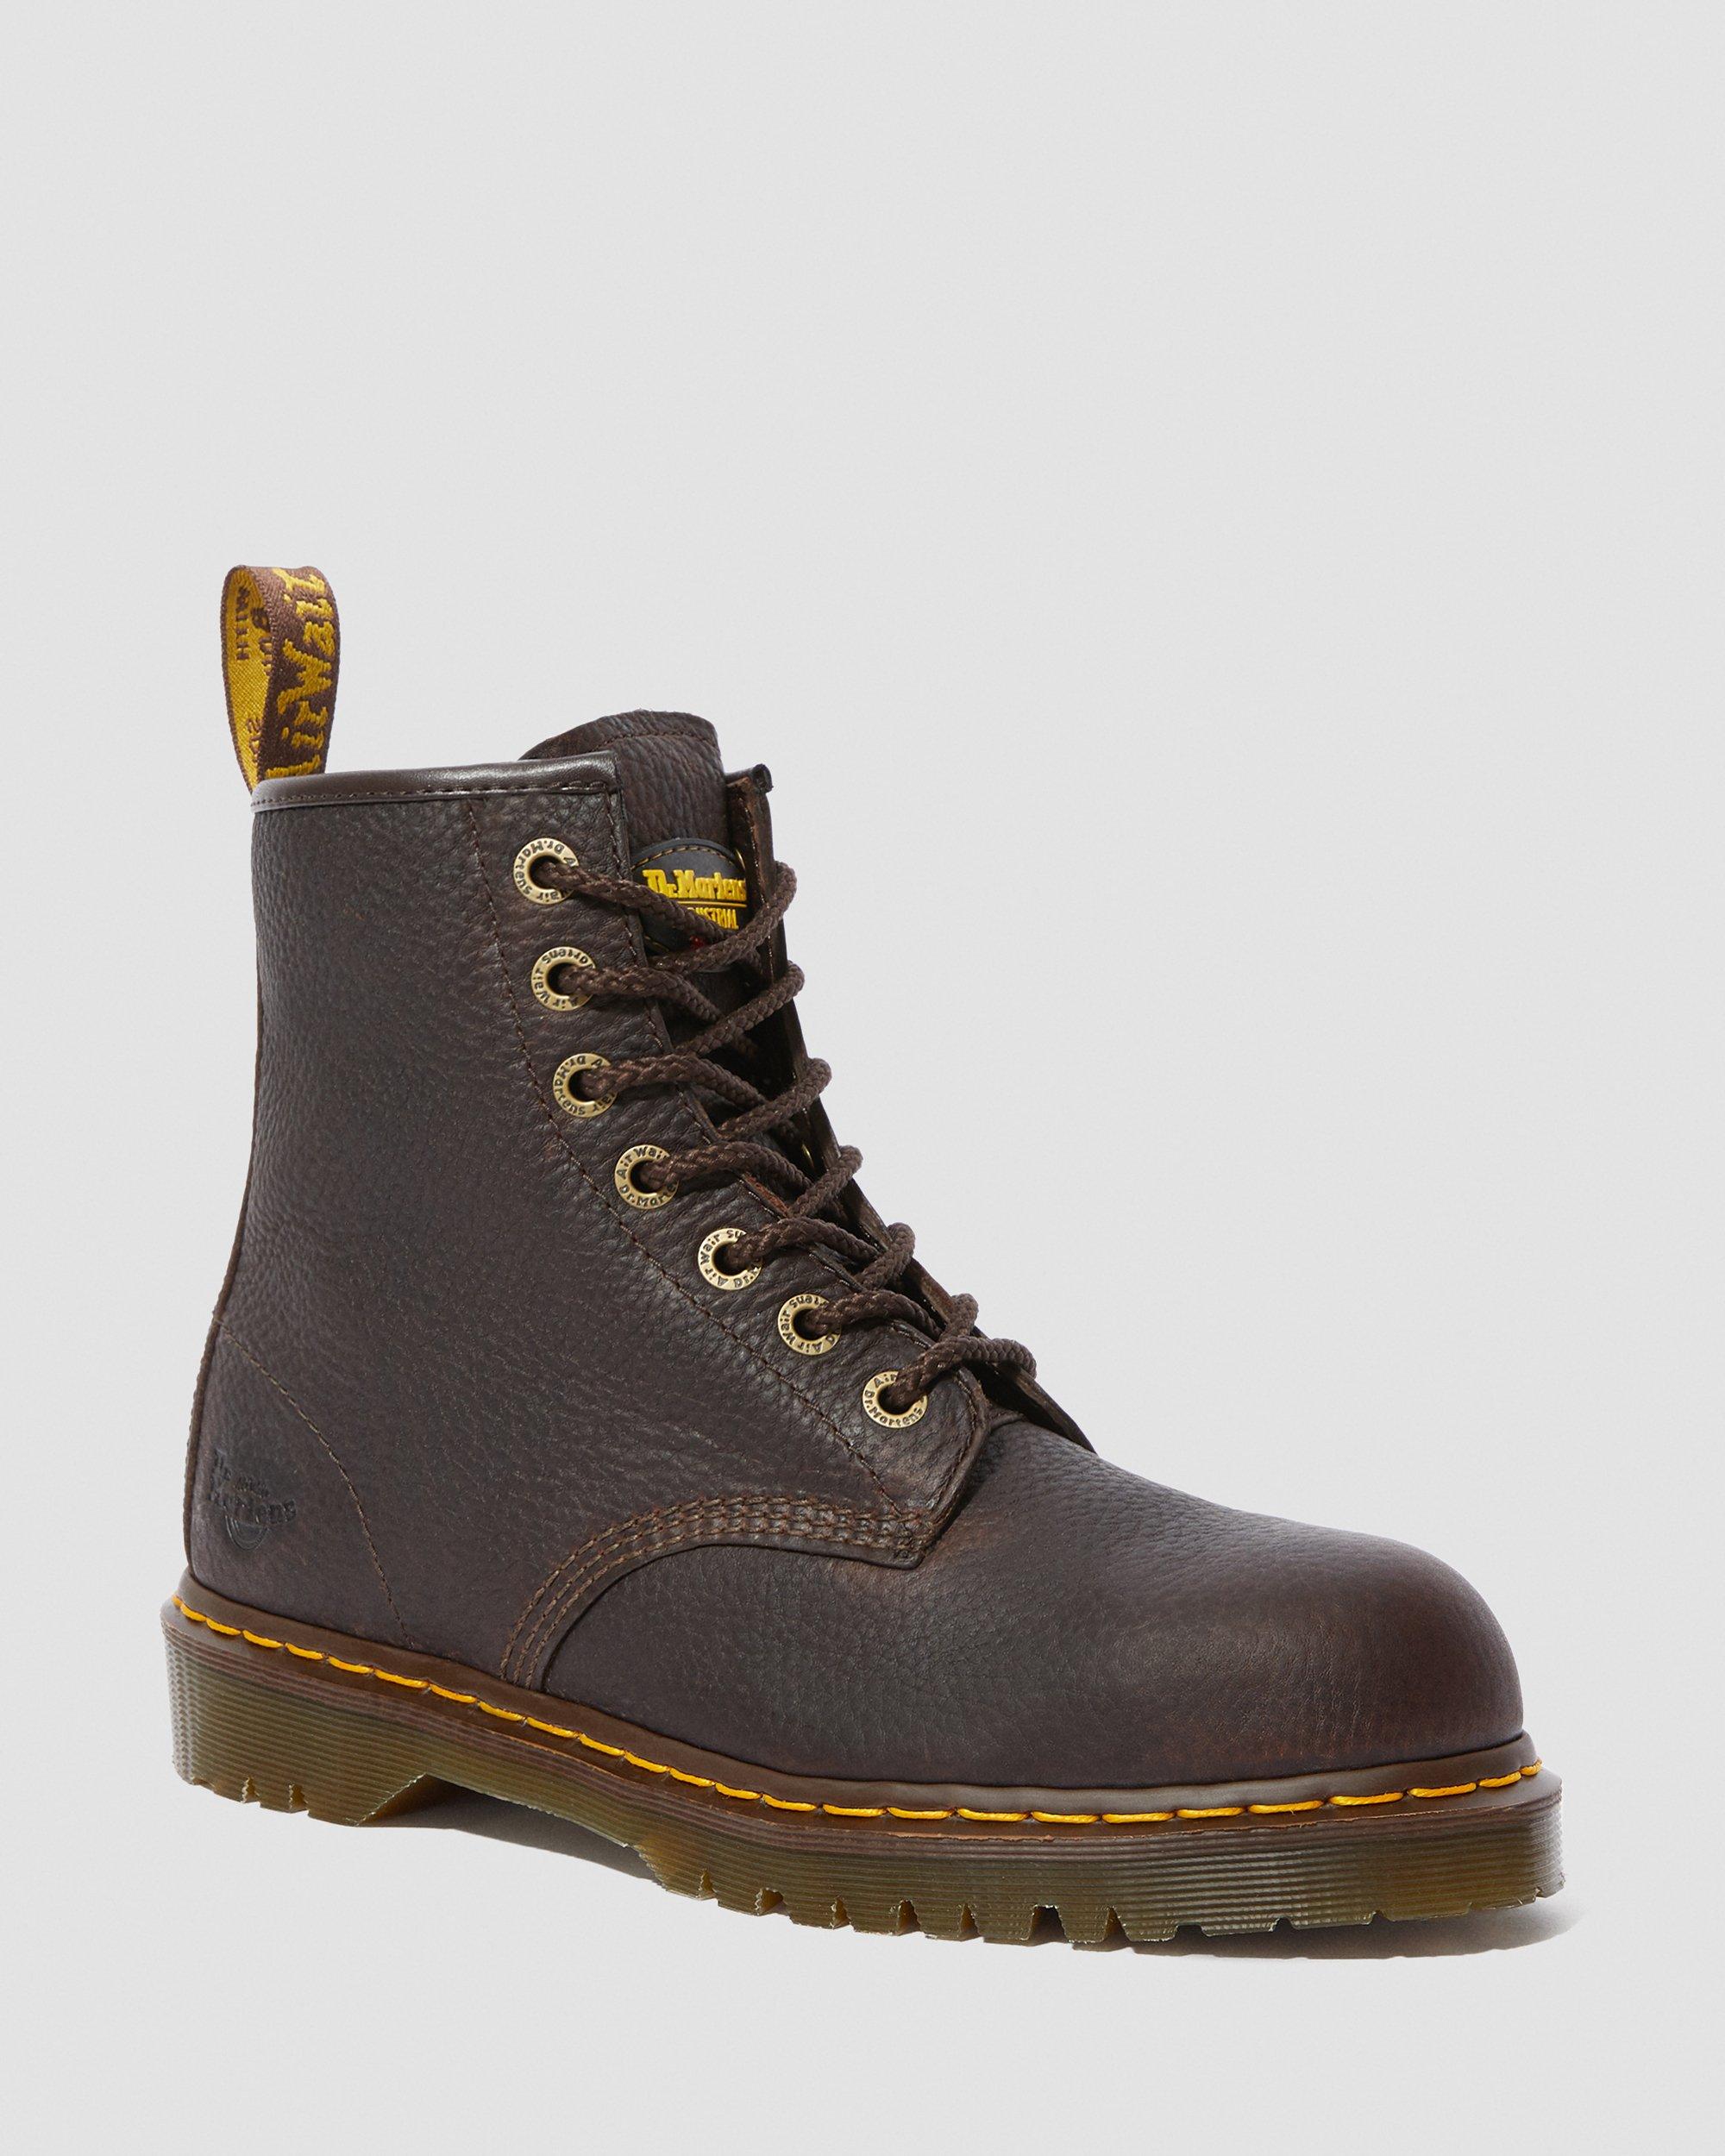 Icon 7B10 Steel Toe Work Boots | Dr. Martens